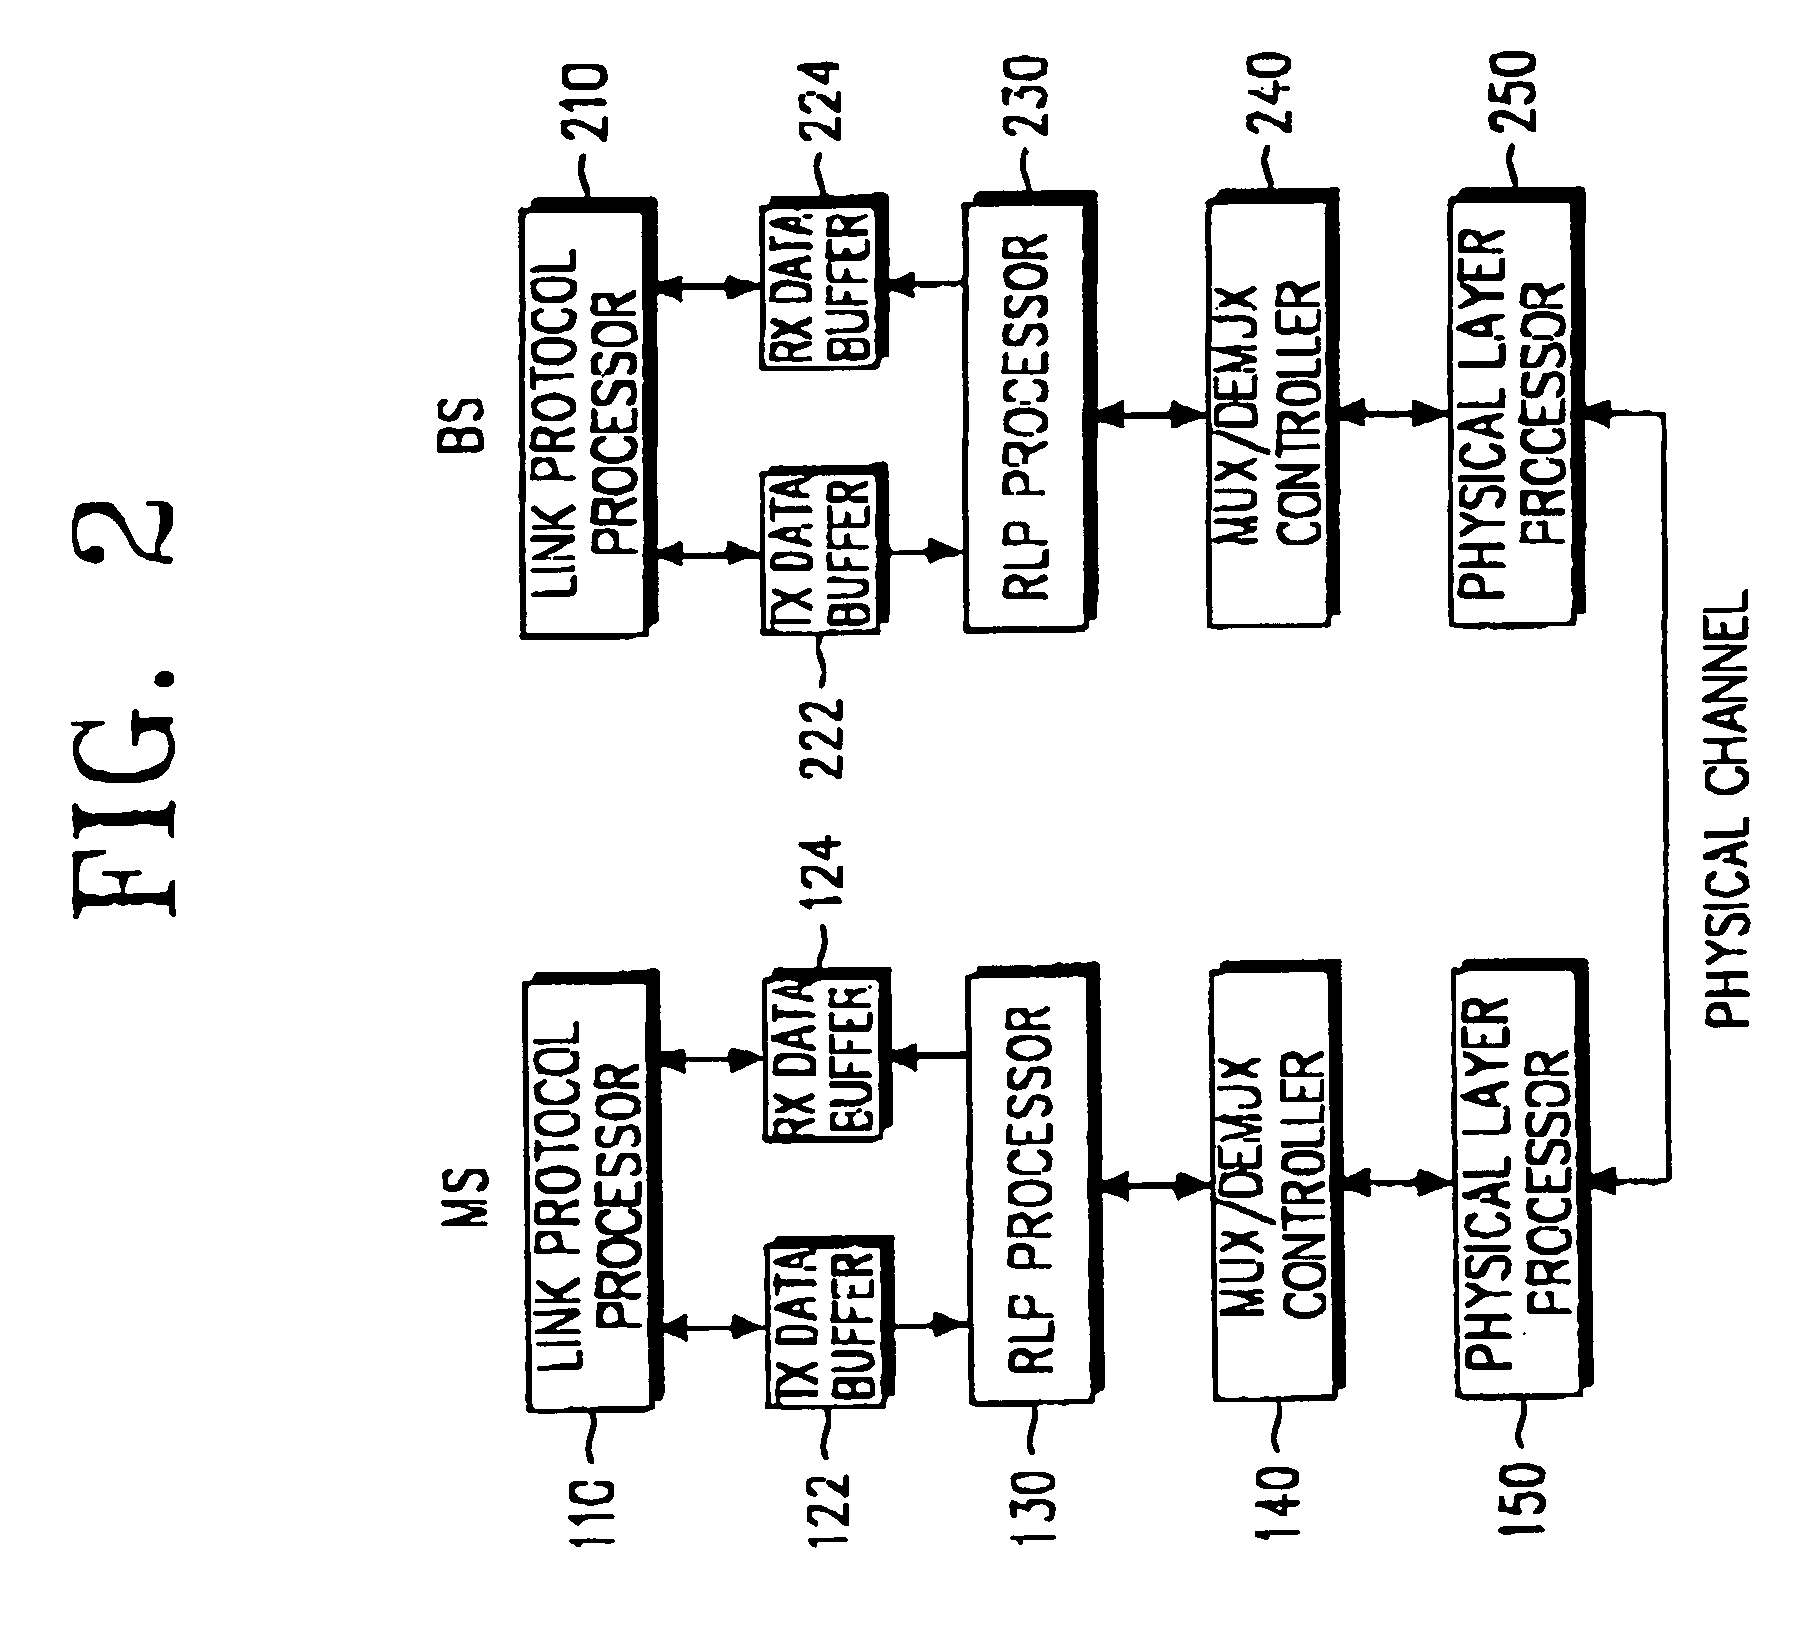 Apparatus and method for transmitting variable-length data according to a radio link protocol in a mobile communication system